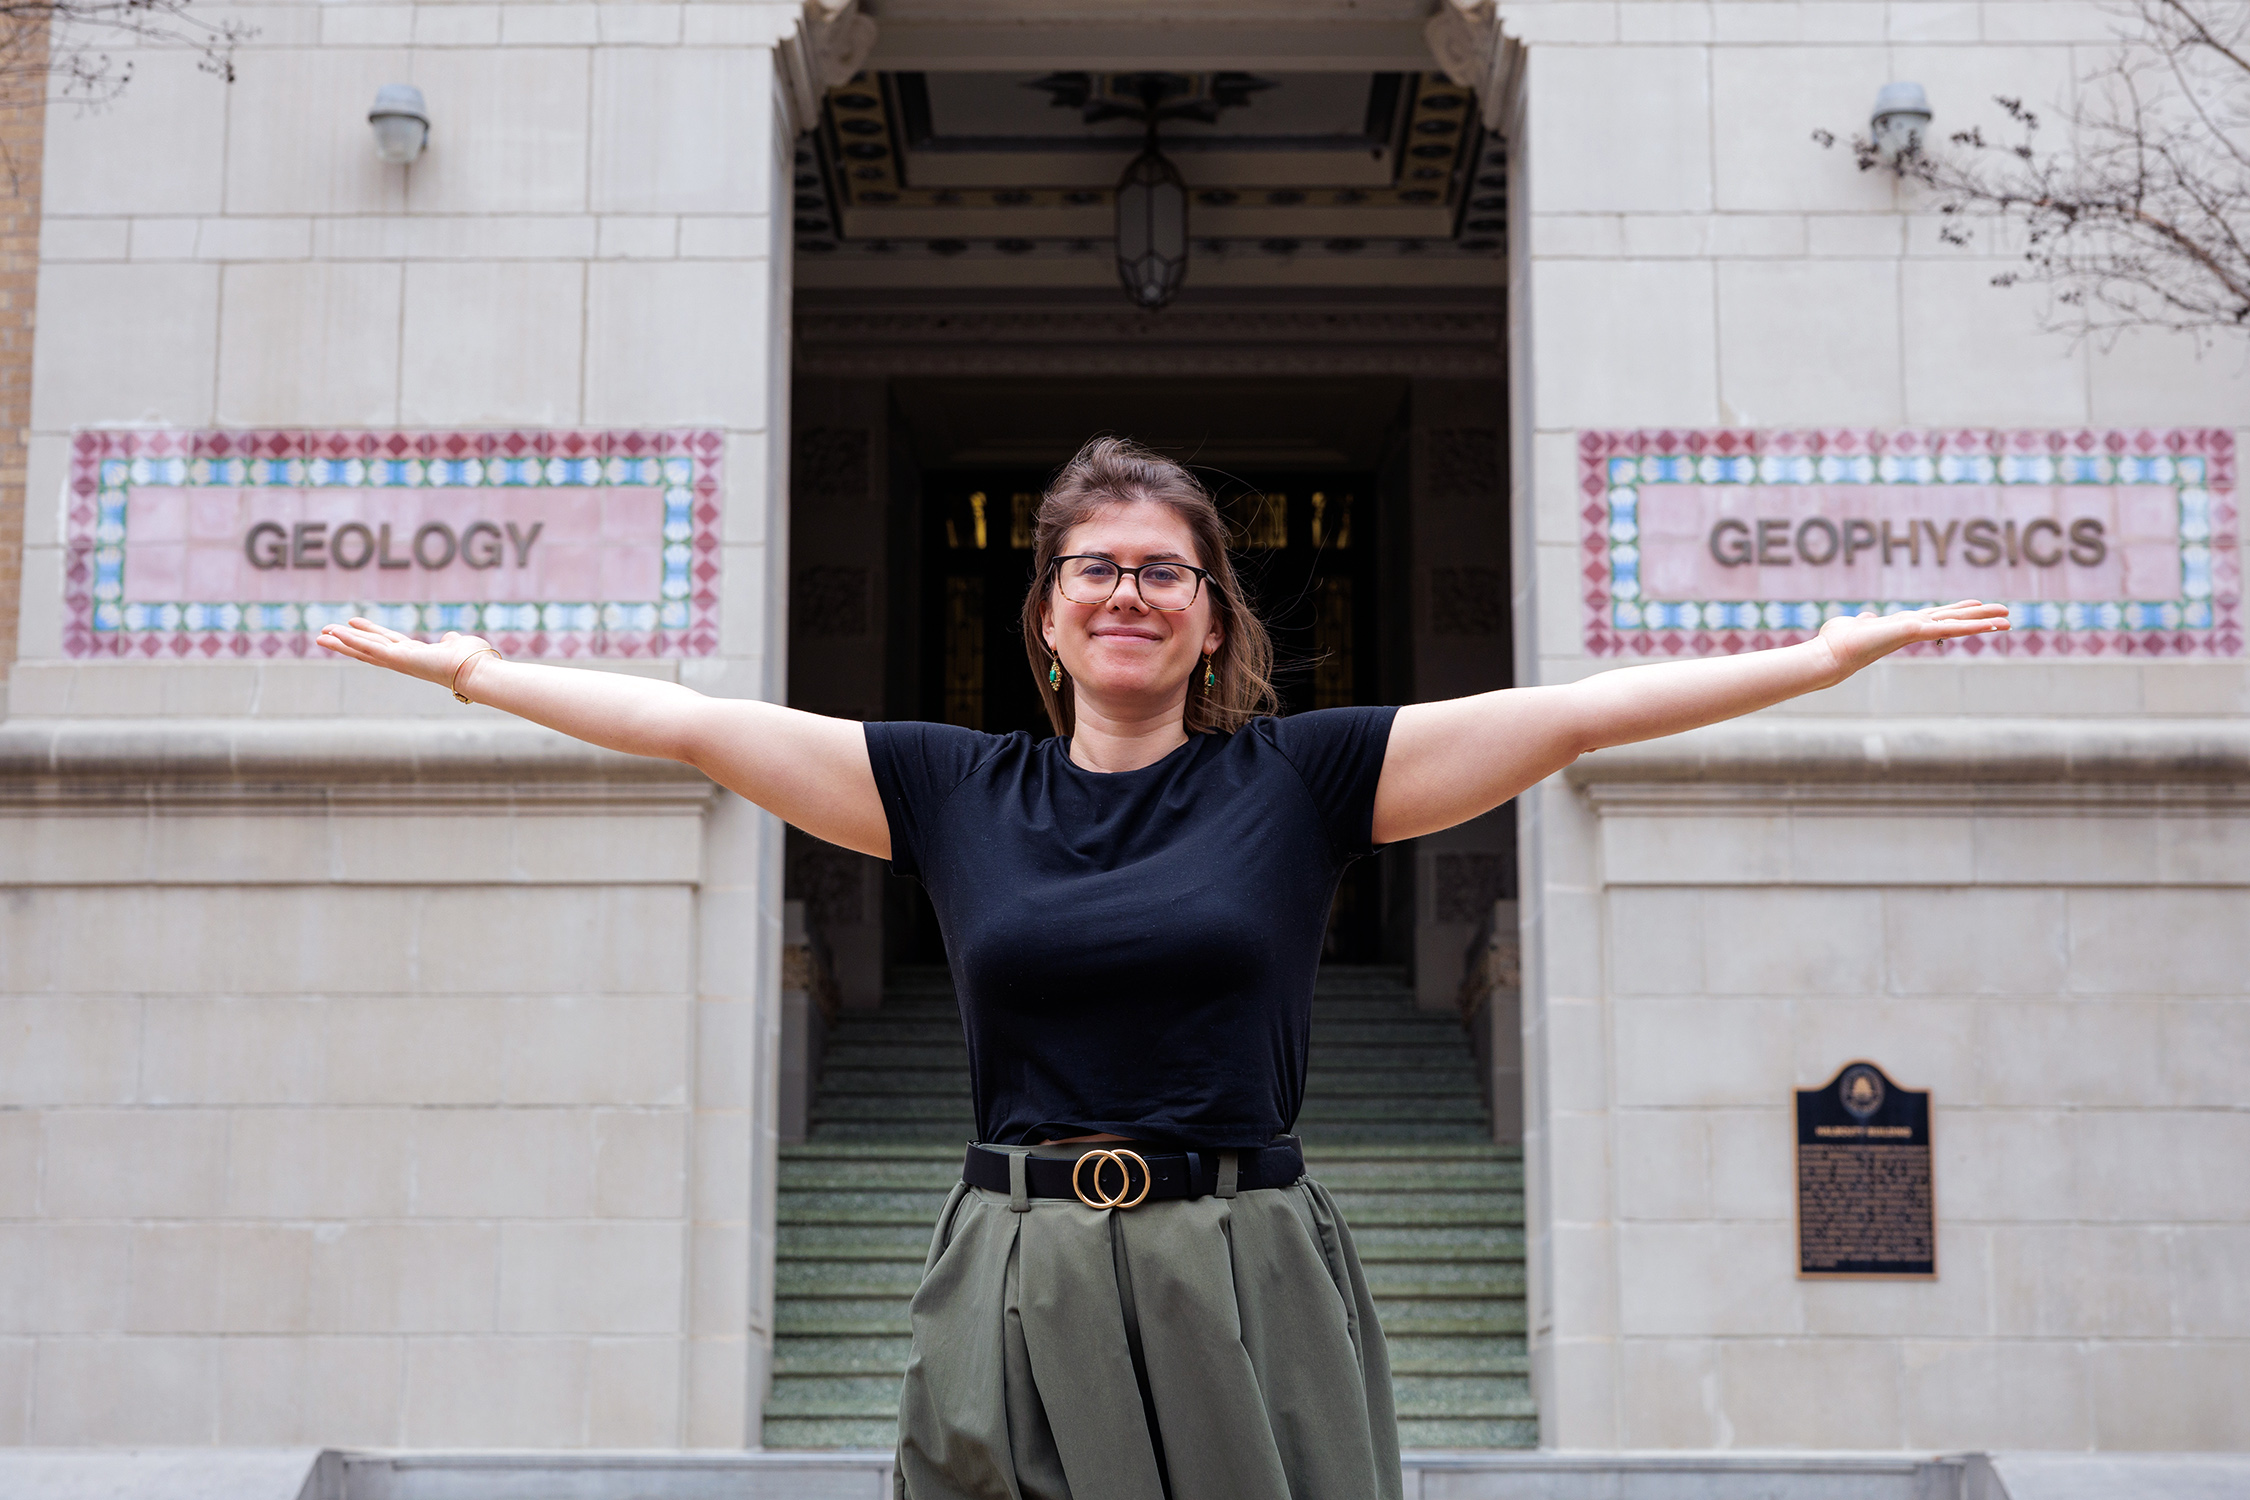 Texas A&amp;M University Geology and Geophysics professor Brandi Lenz stands outside the Halbouty Building with outstretched arms, extending her palms in metaphorical support of the words "Geology" and "Geophysics" that appear in intricate tile format on the building's exterior wall